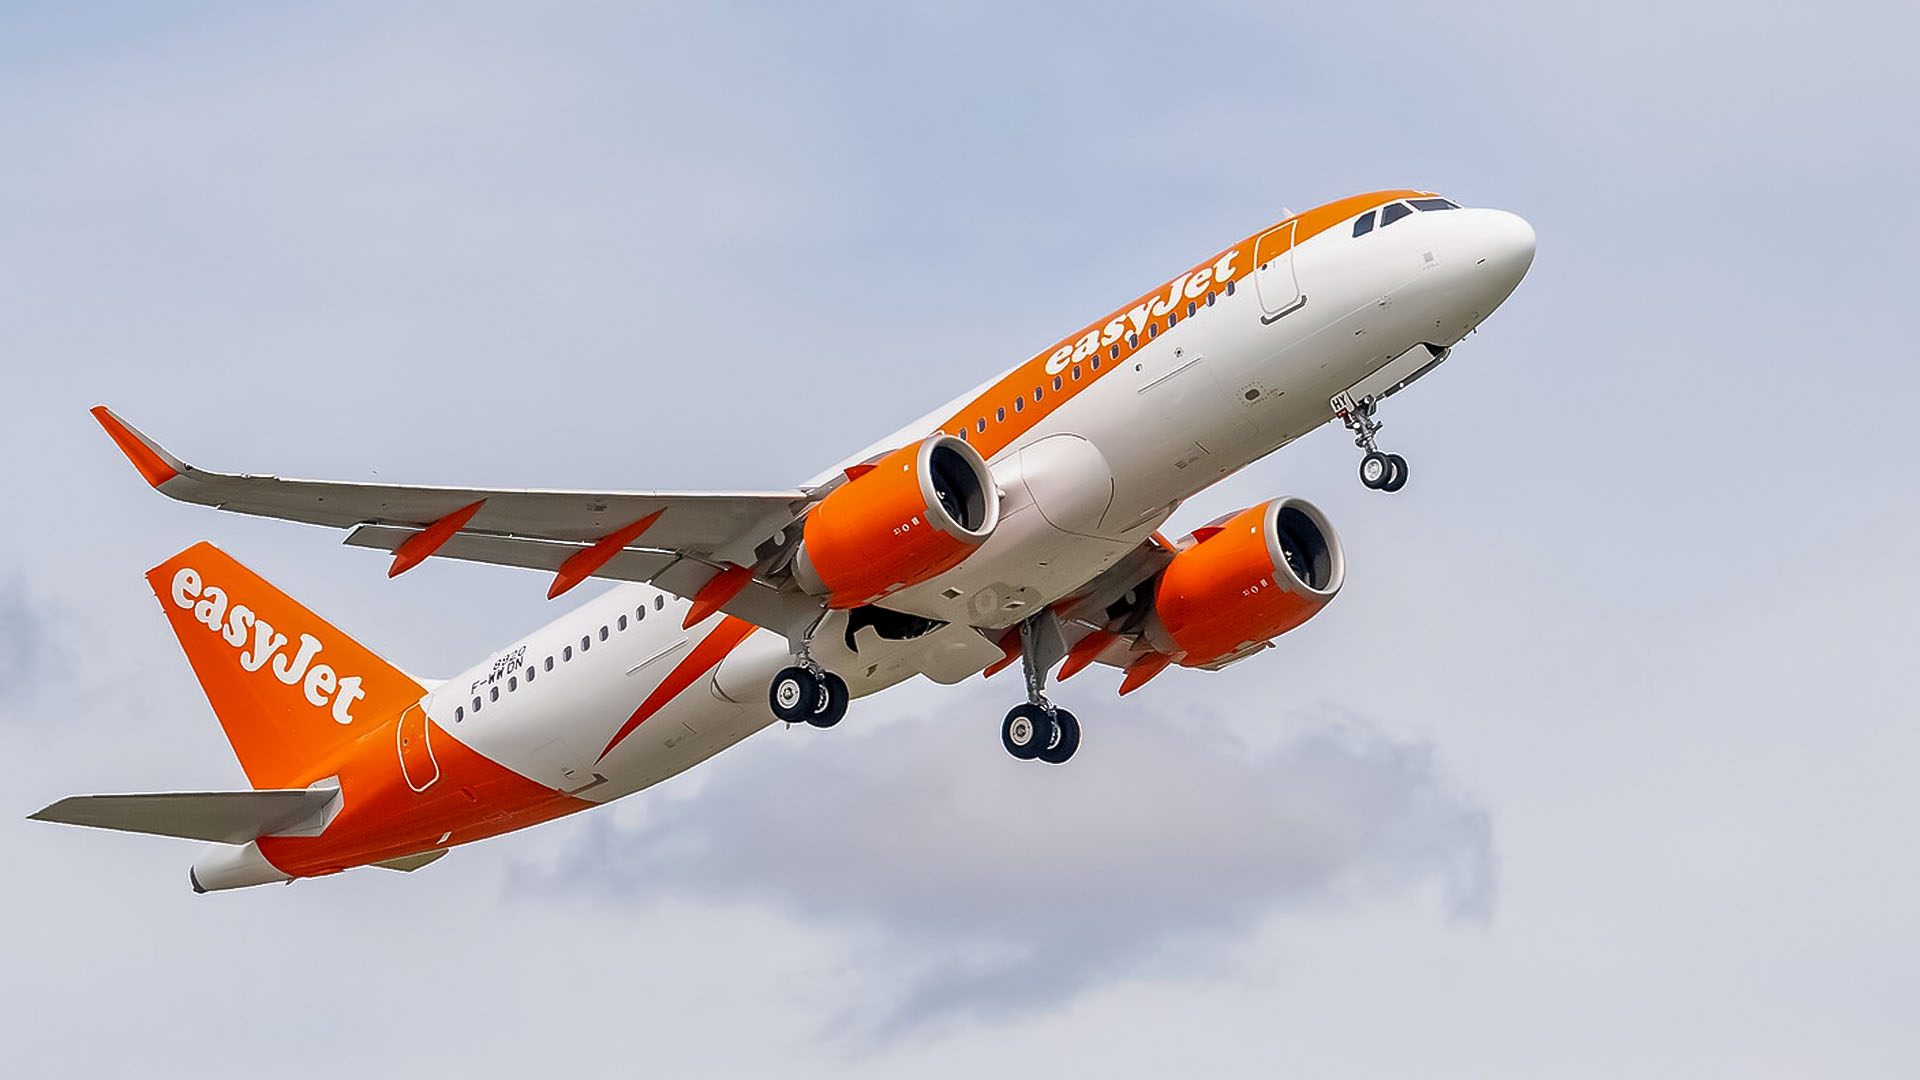 More than 200 flights are canceled by easyJet